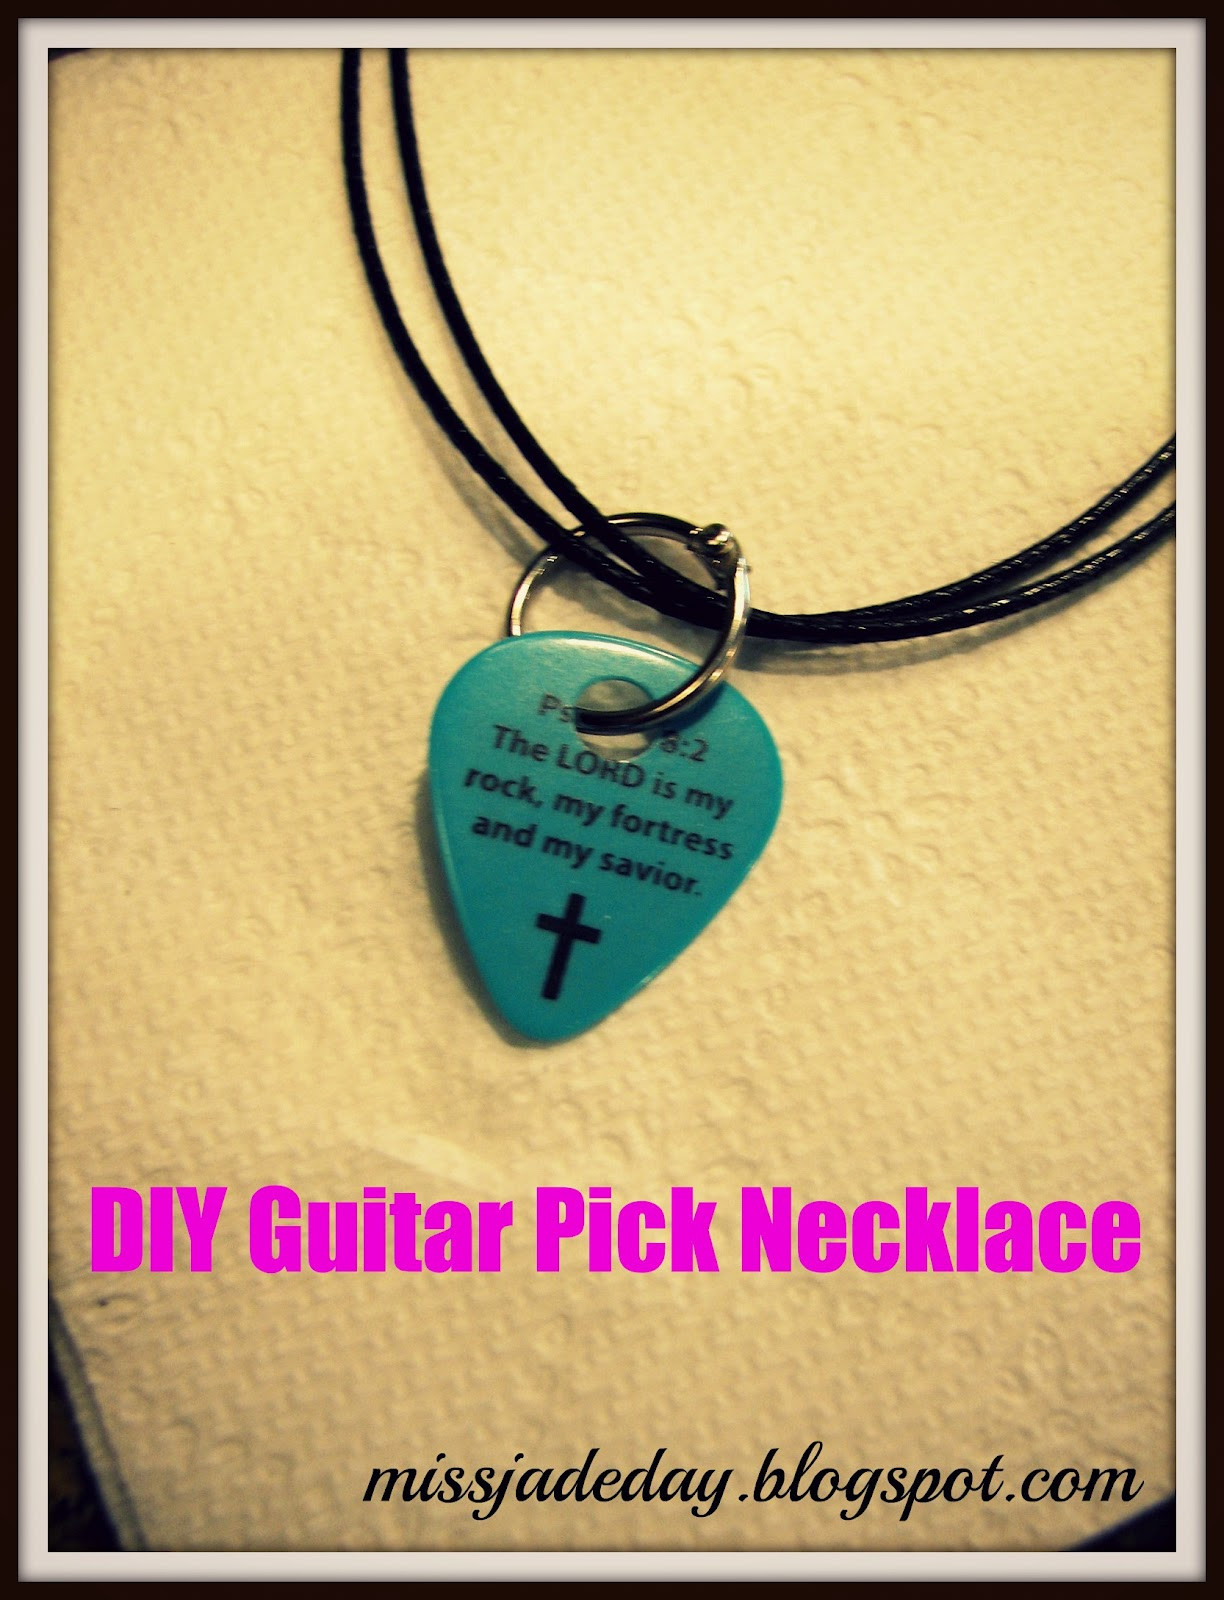 Best ideas about DIY Guitar Pick
. Save or Pin Miss Jade Day DIY Guitar Pick Necklace Now.